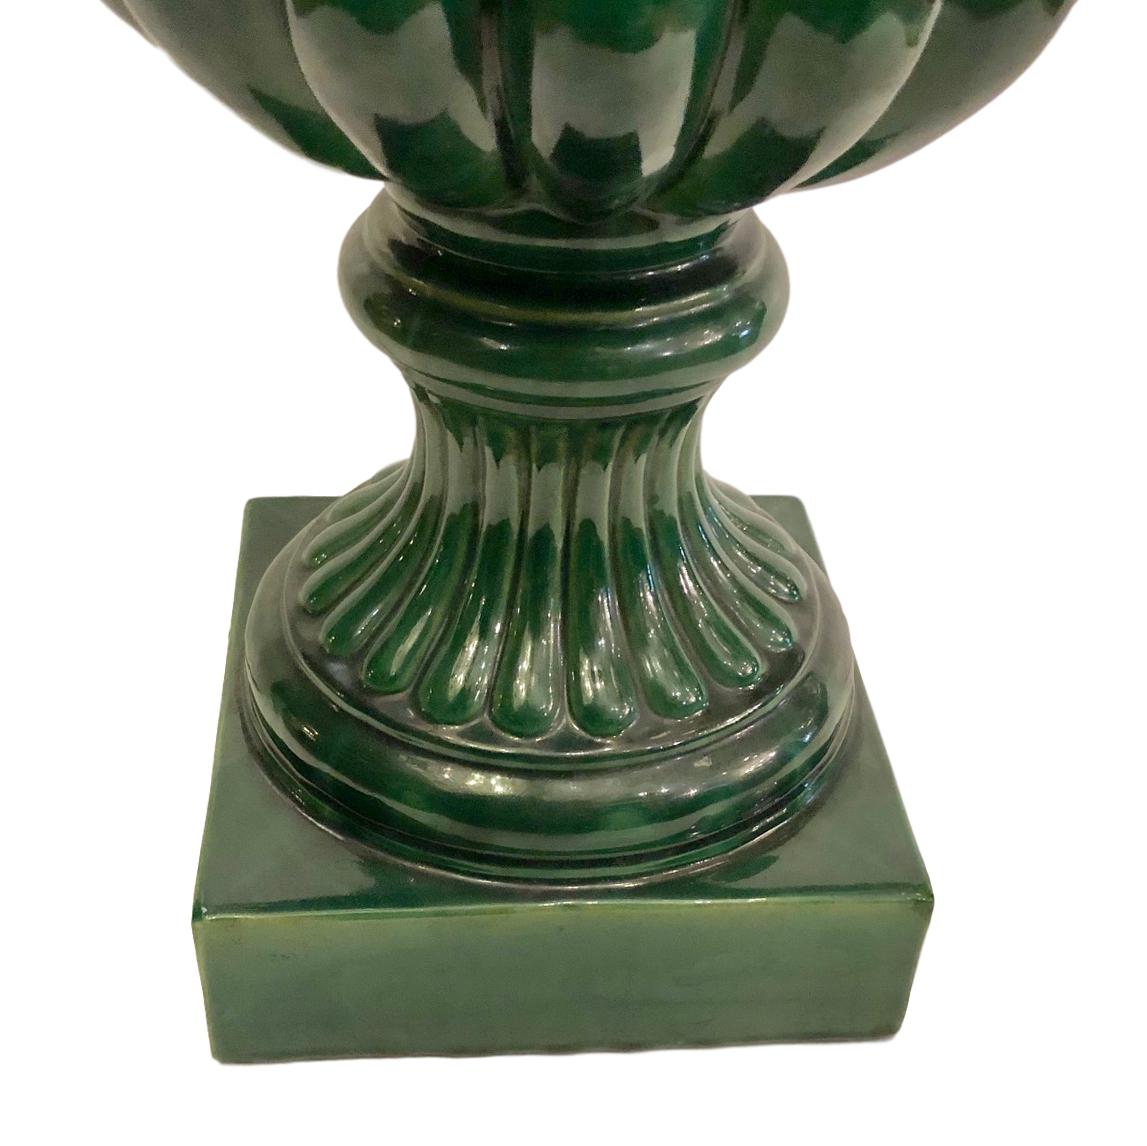 A large single green Italian porcelain table lamp in the form of a pine cone, circa 1930s.

Measurements:
Height of body: 26